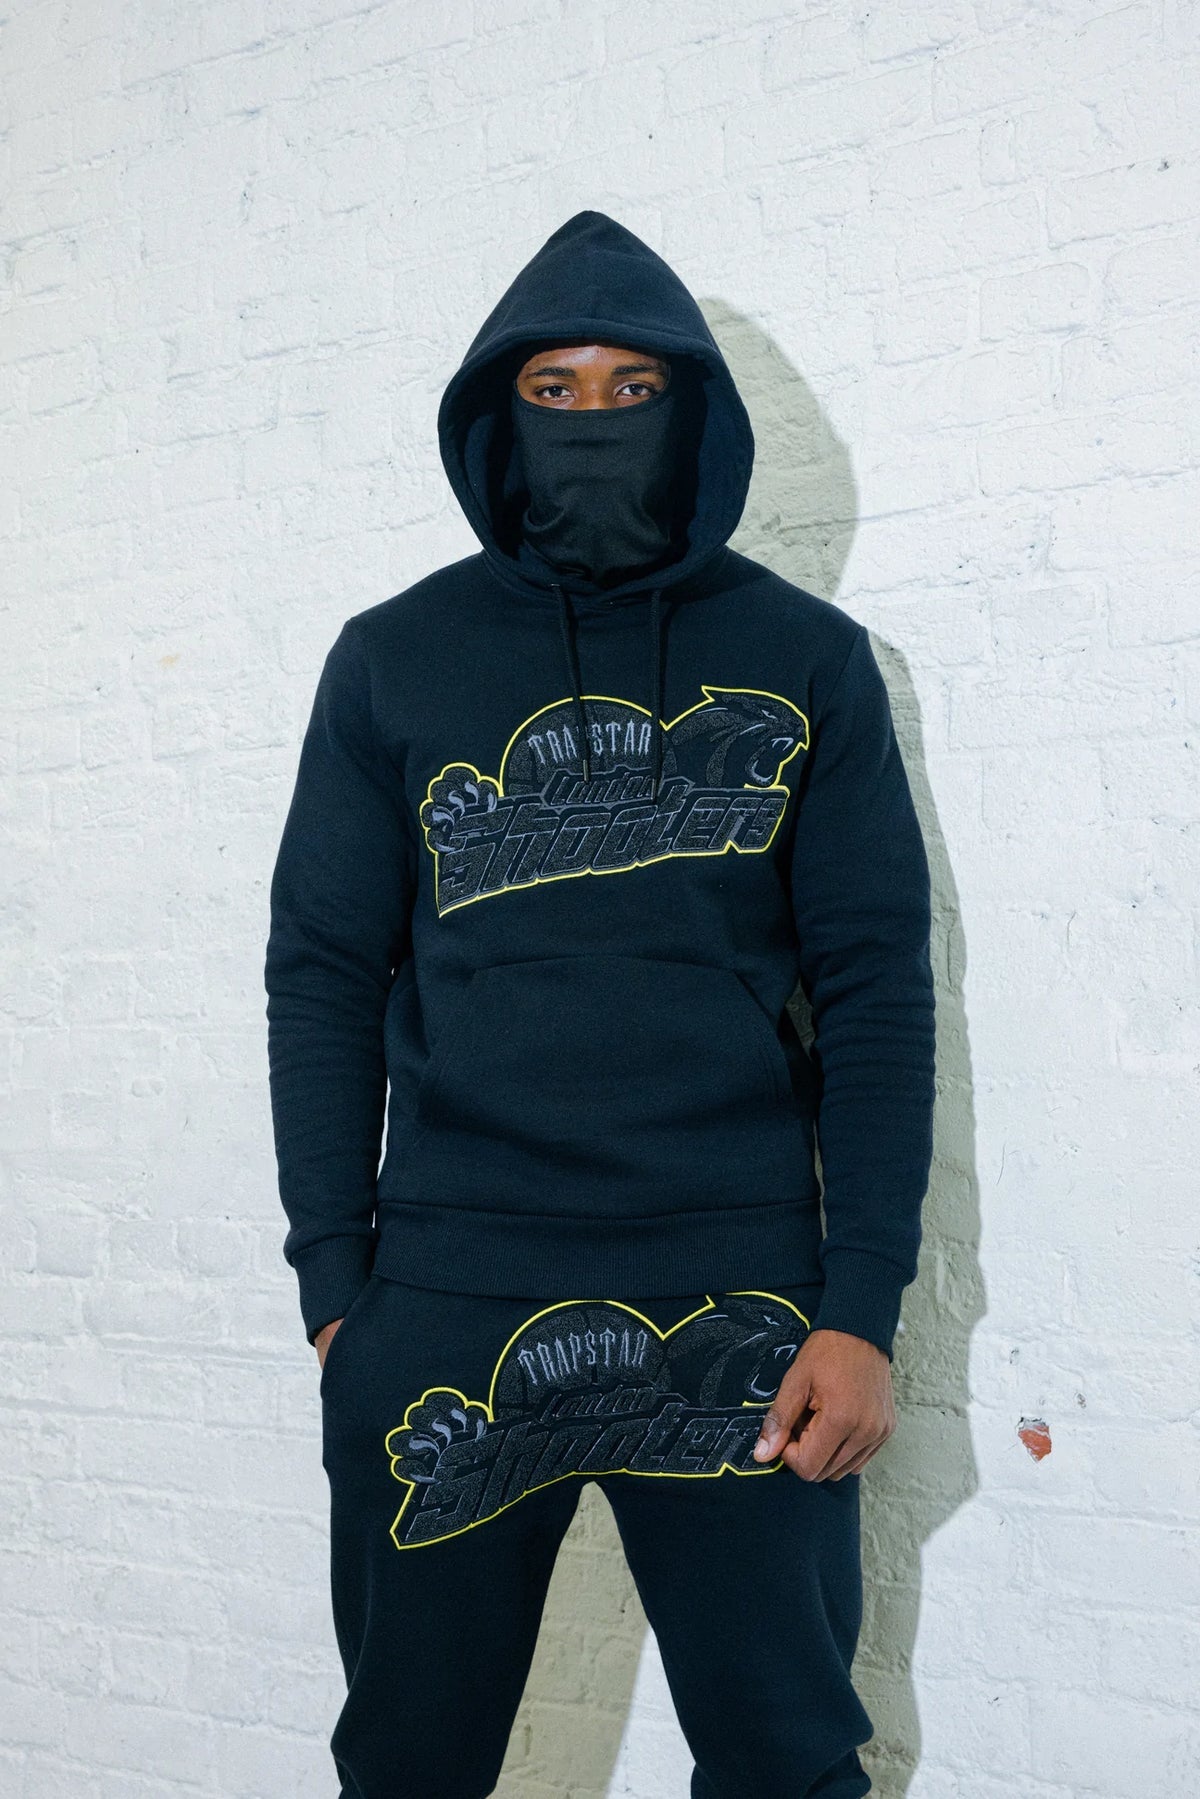 TRAPSTAR SHOOTERS TRACKSUIT ‘BLACK & LIME’